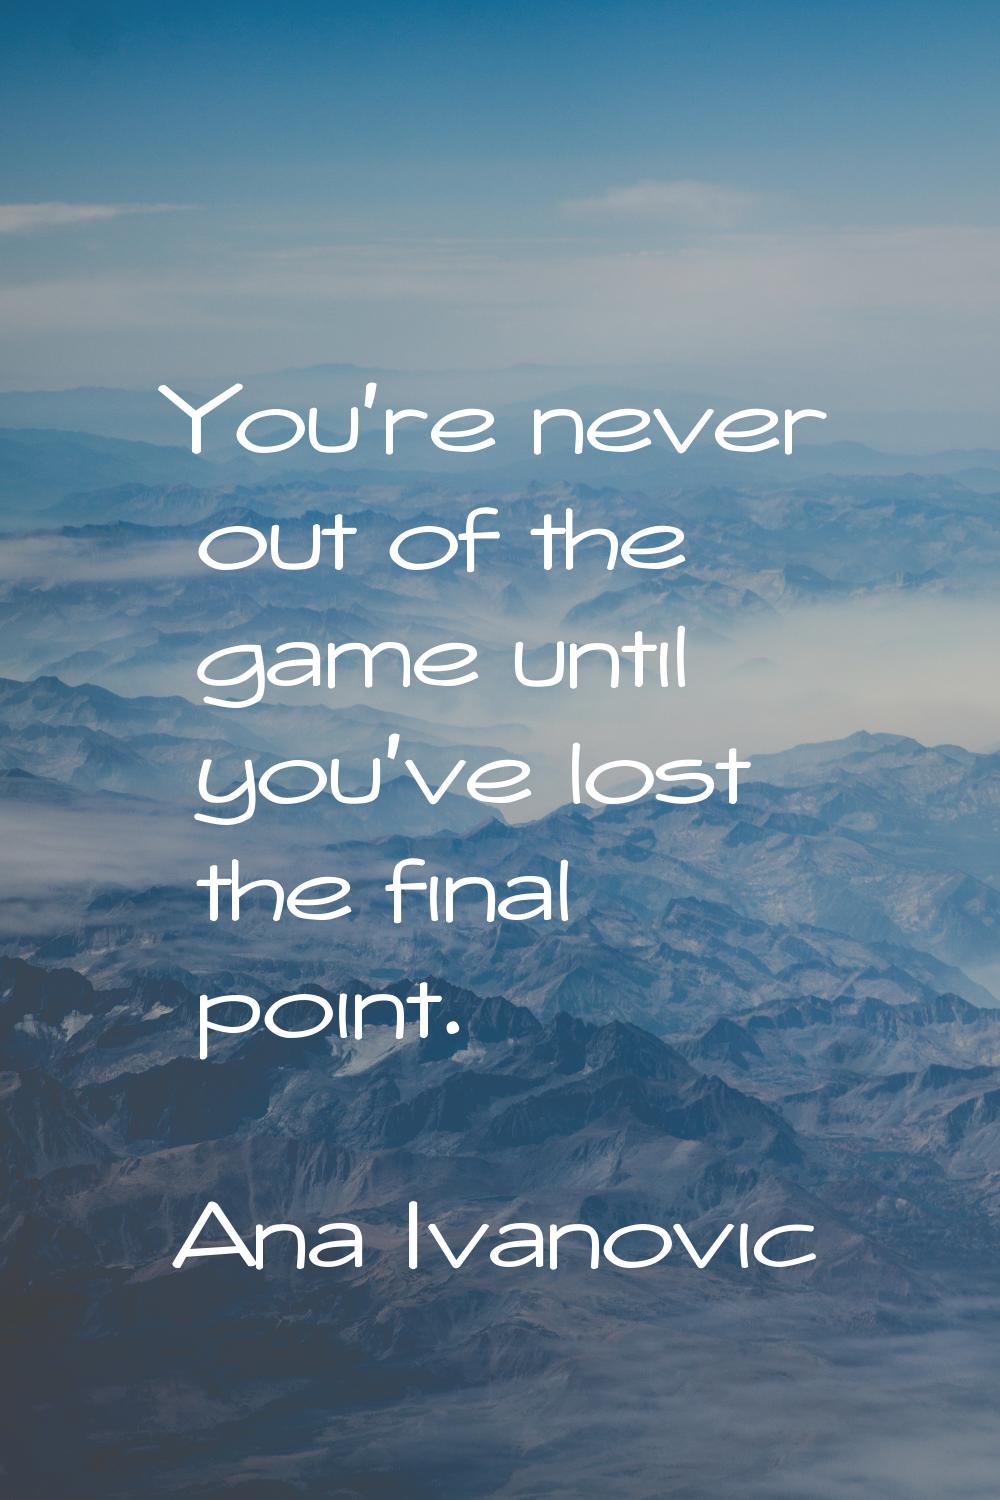 You're never out of the game until you've lost the final point.